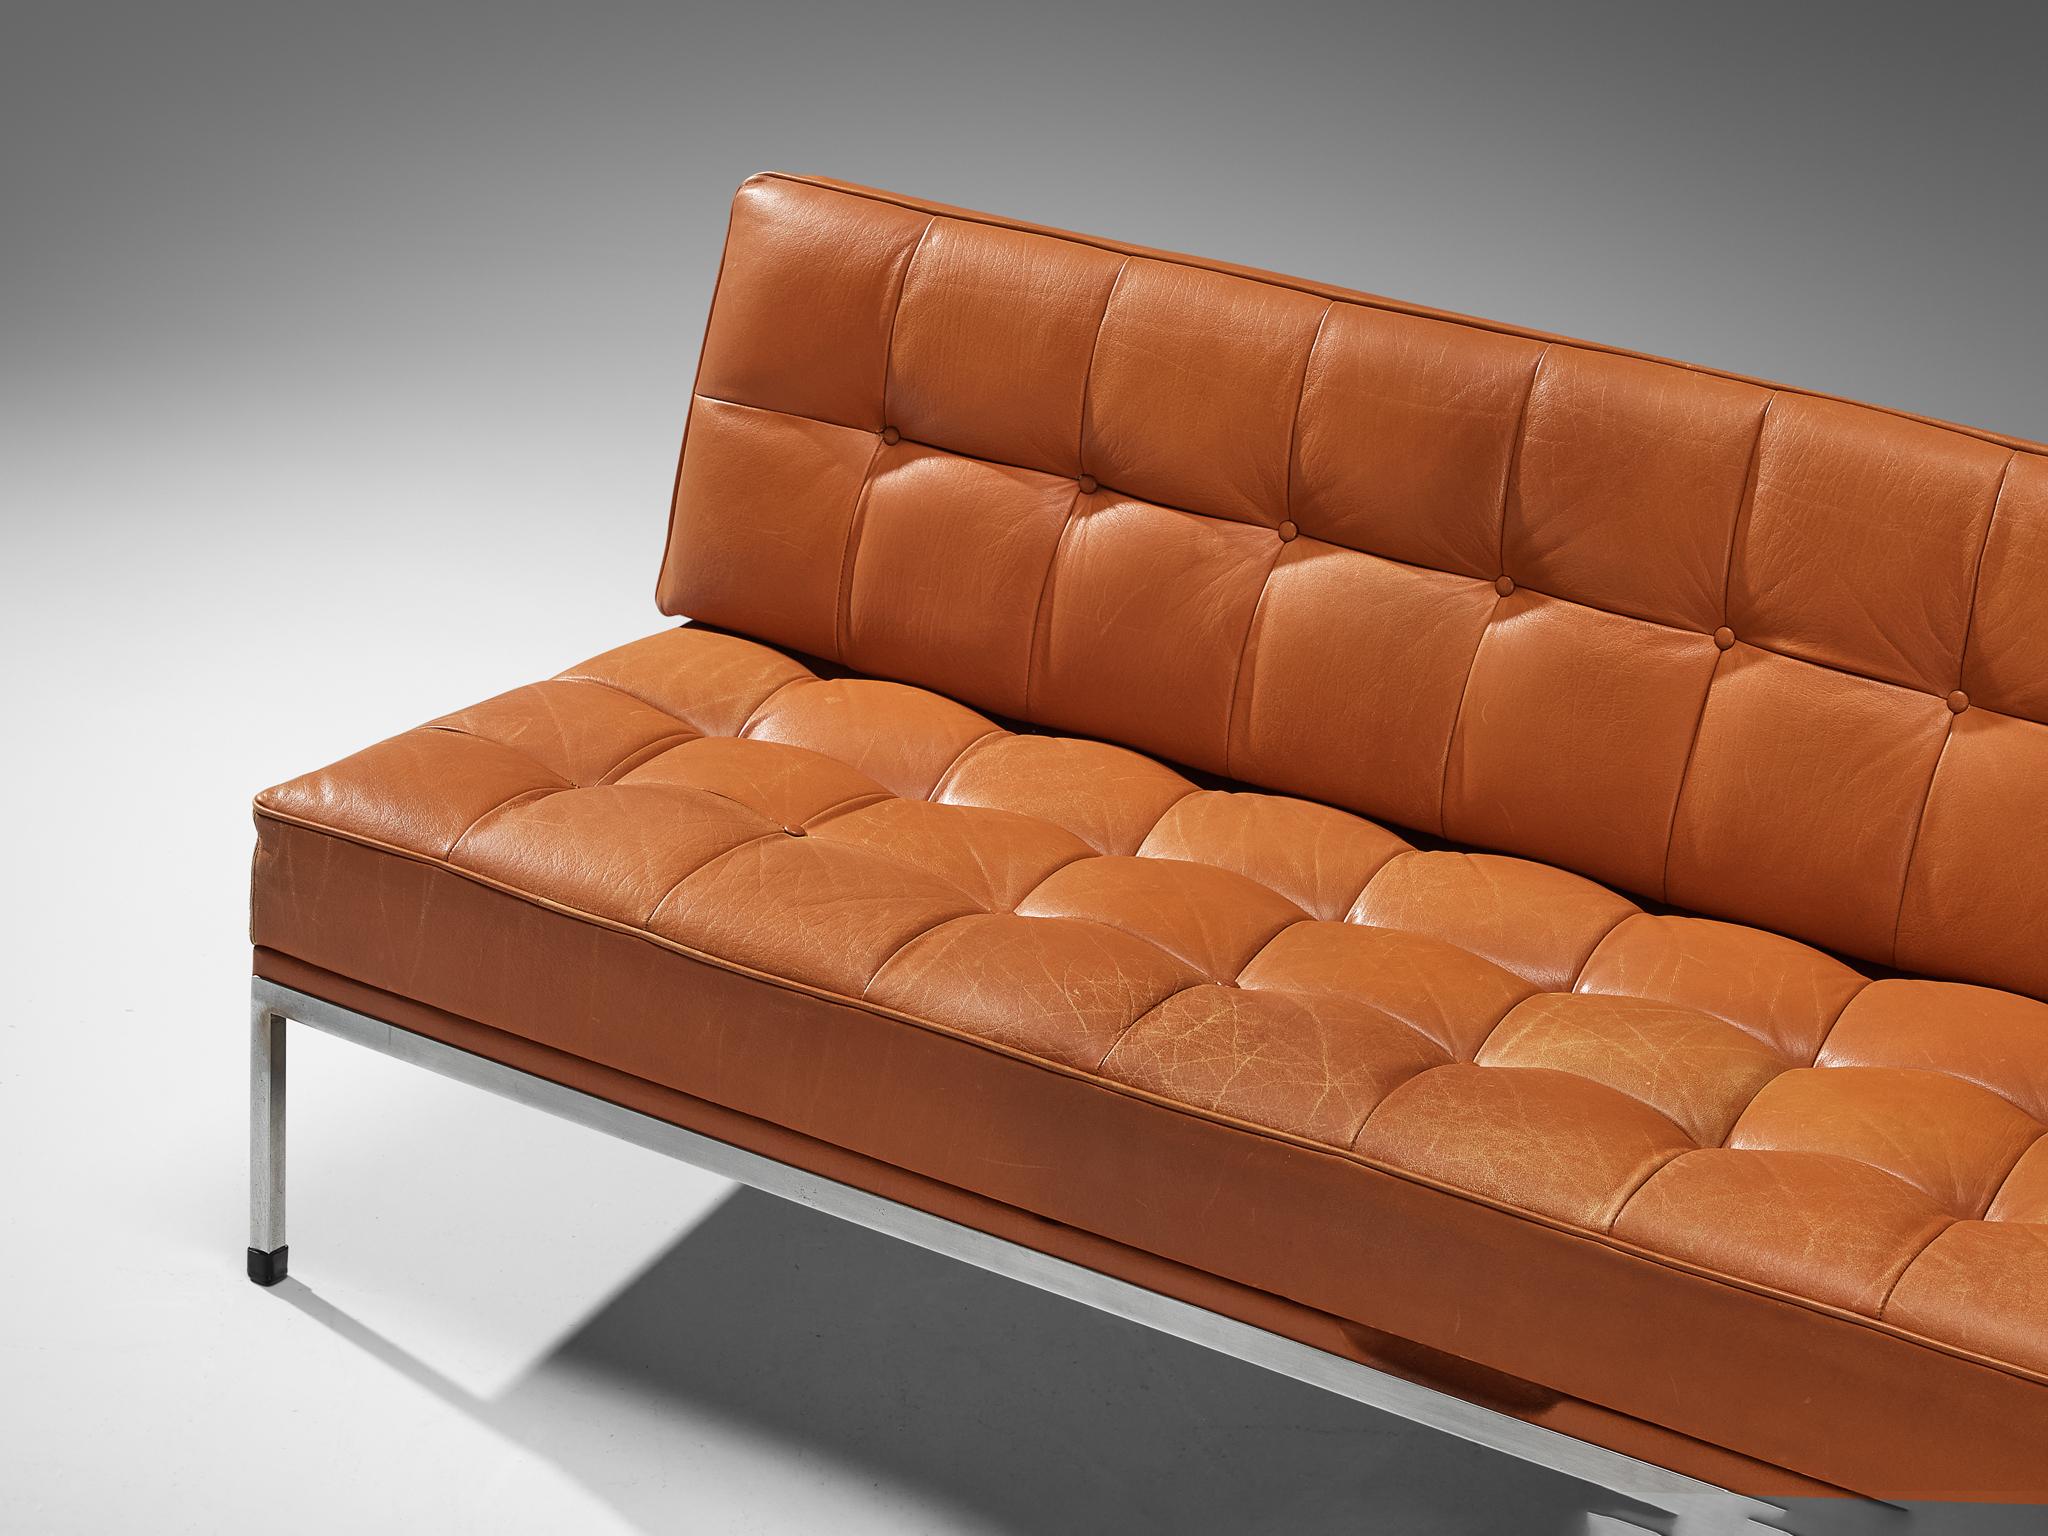 Johannes Spalt 'Constanza' Sofa Daybed in Cognac Leather  For Sale 4